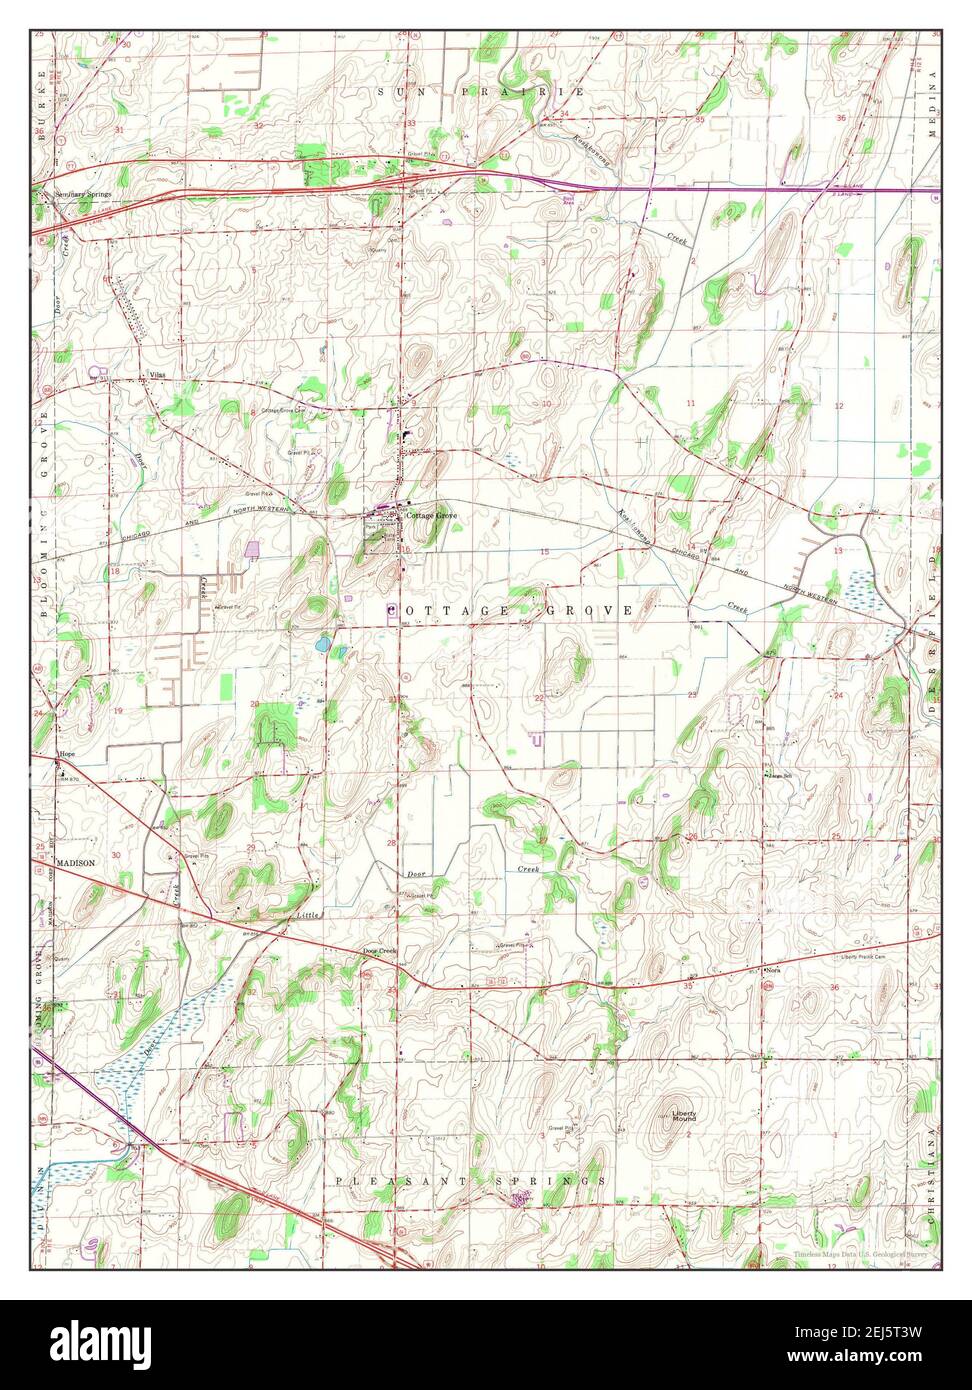 Cottage Grove Wisconsin Map 1962 124000 United States Of America By Timeless Maps Data Us Geological Survey 2EJ5T3W 